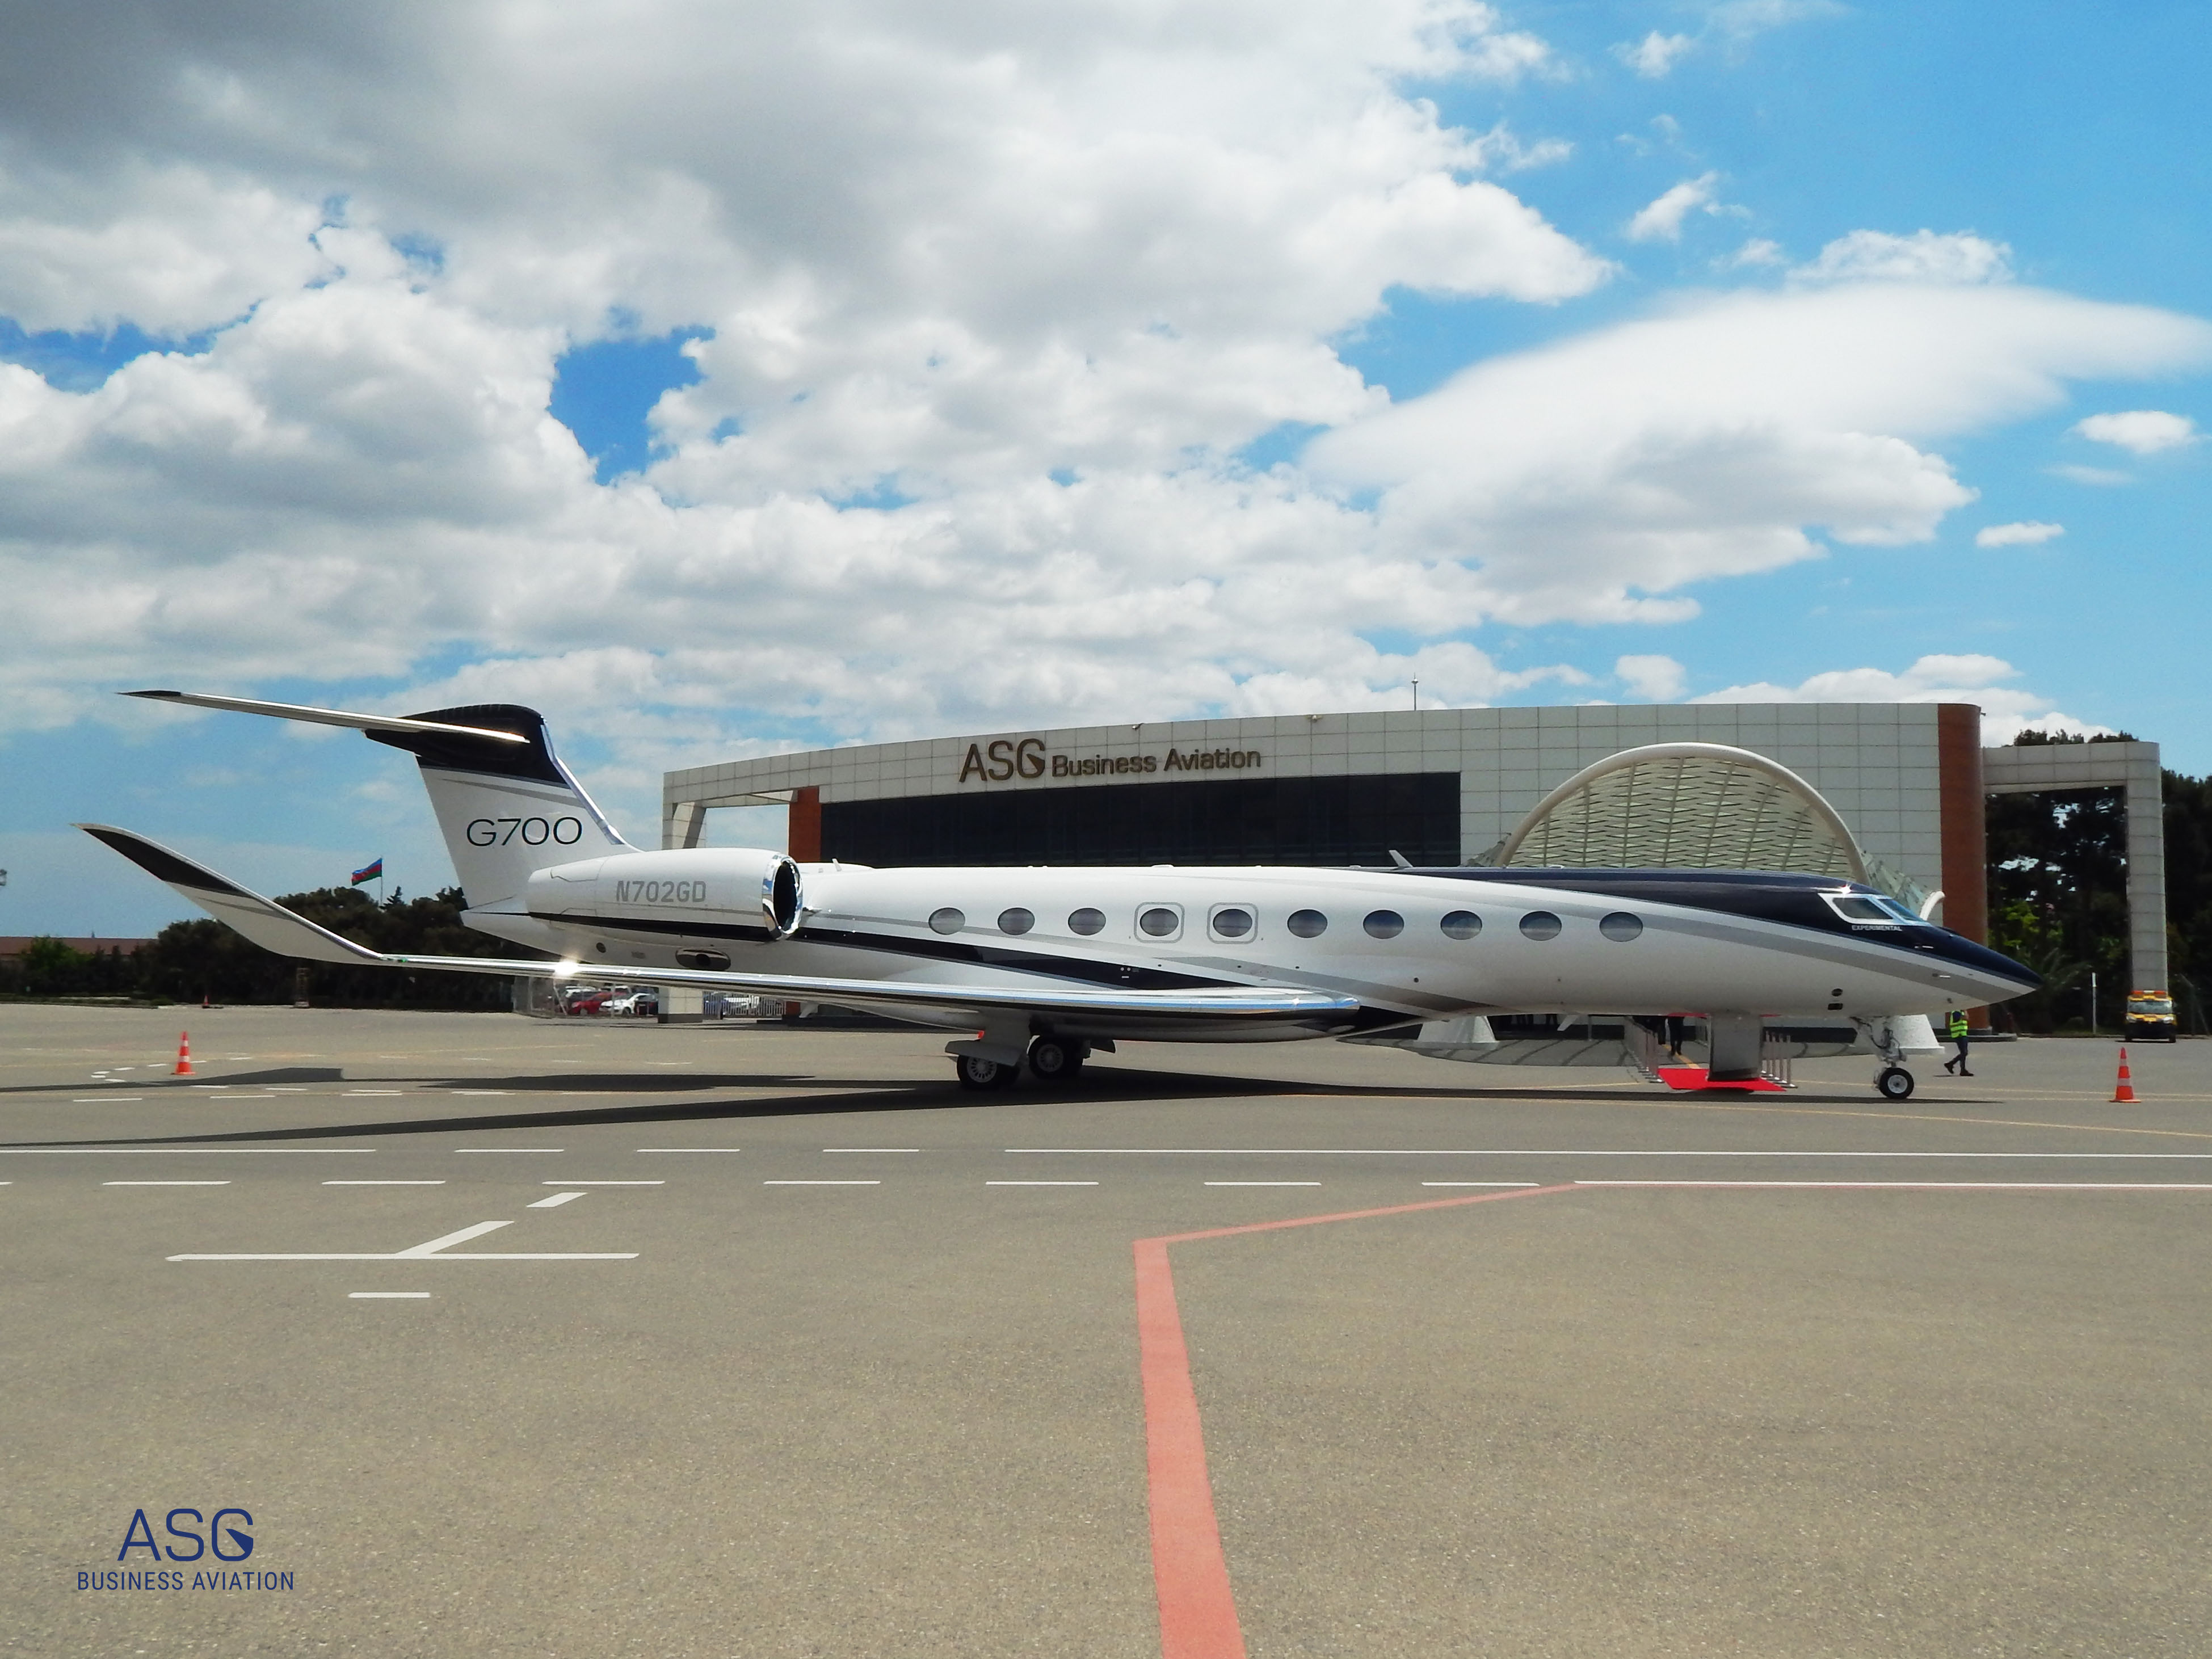 "Gulfstream G700" was displayed at the "ASG Business Aviation" terminal as part of the world tour